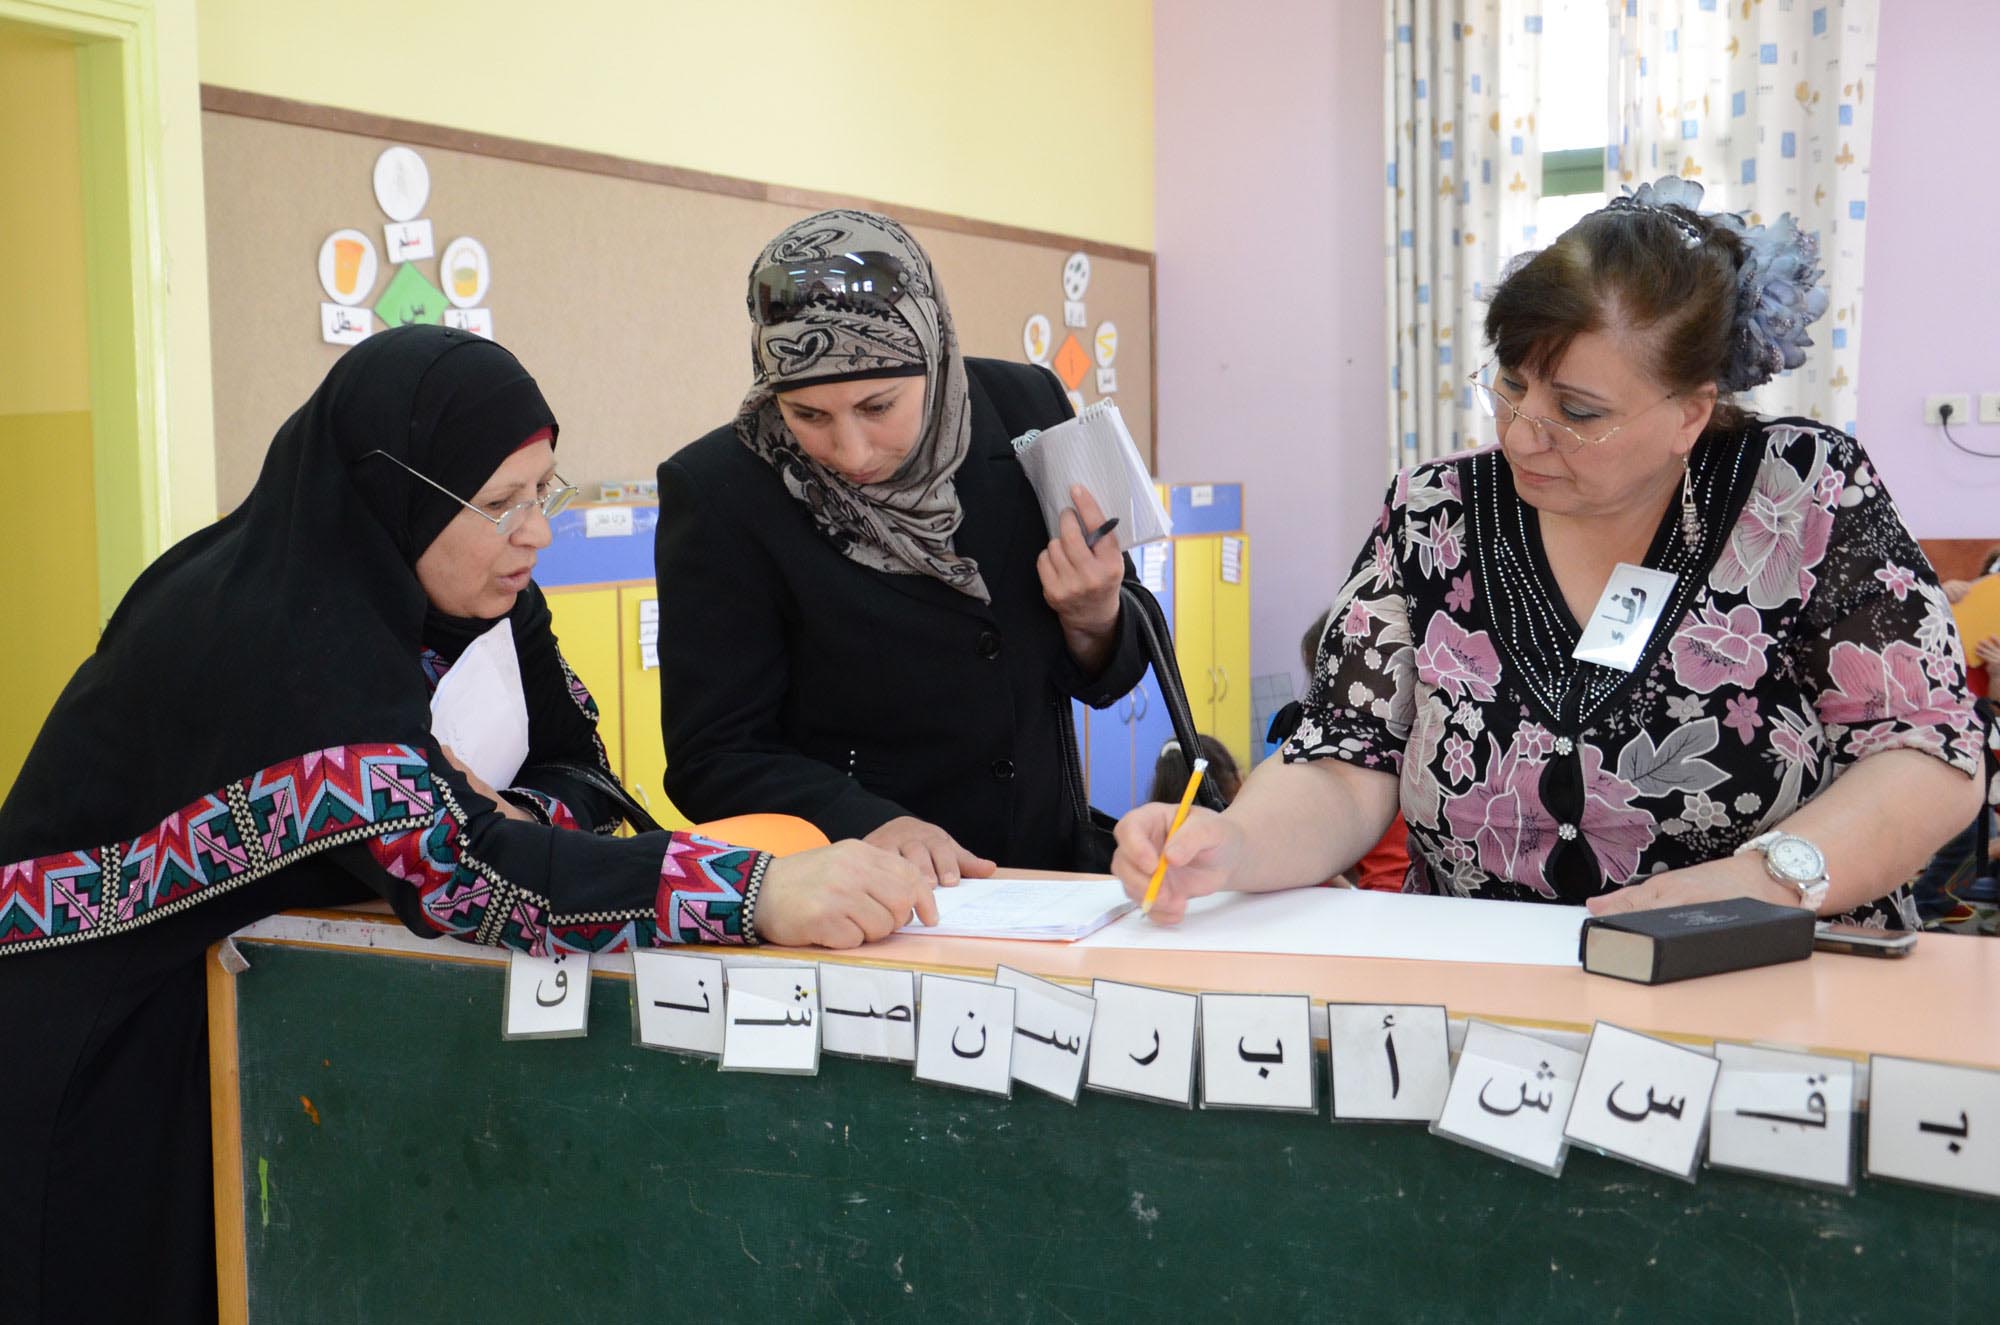 Three early childhood development teacher trainees check their notes after an Anera in-service training class in the West Bank.